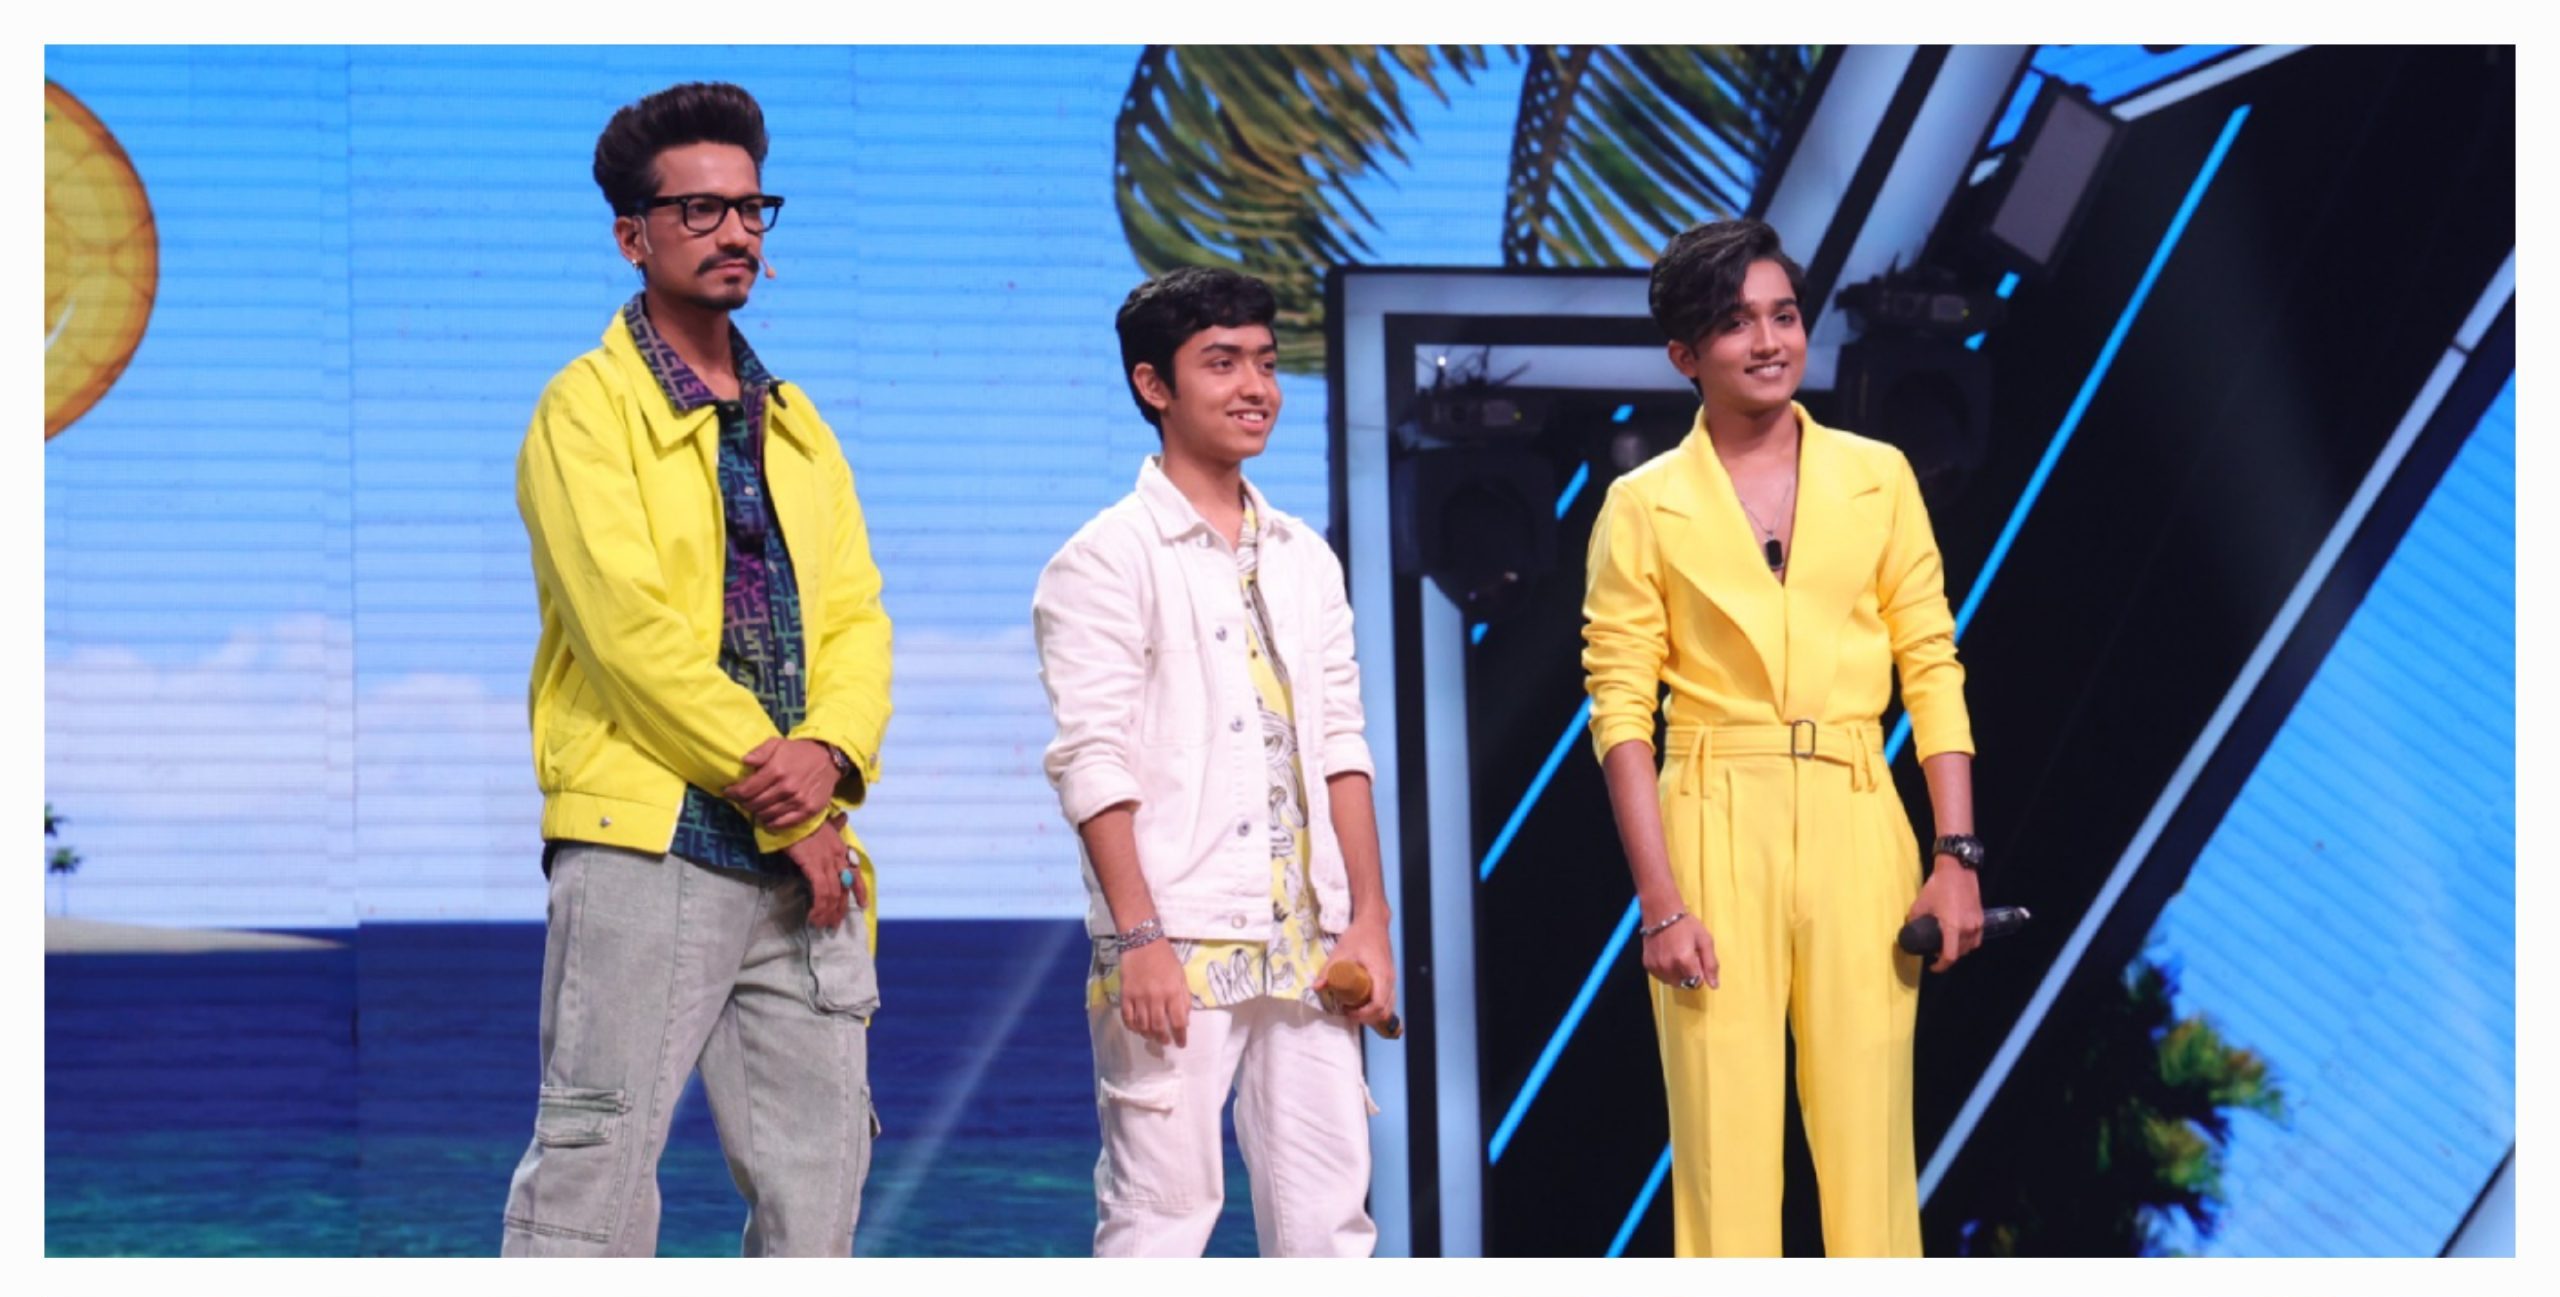 SS2 winner, Mohammad Faiz, presents his lucky strap to SS3 contestant Shubh Sutradhar!